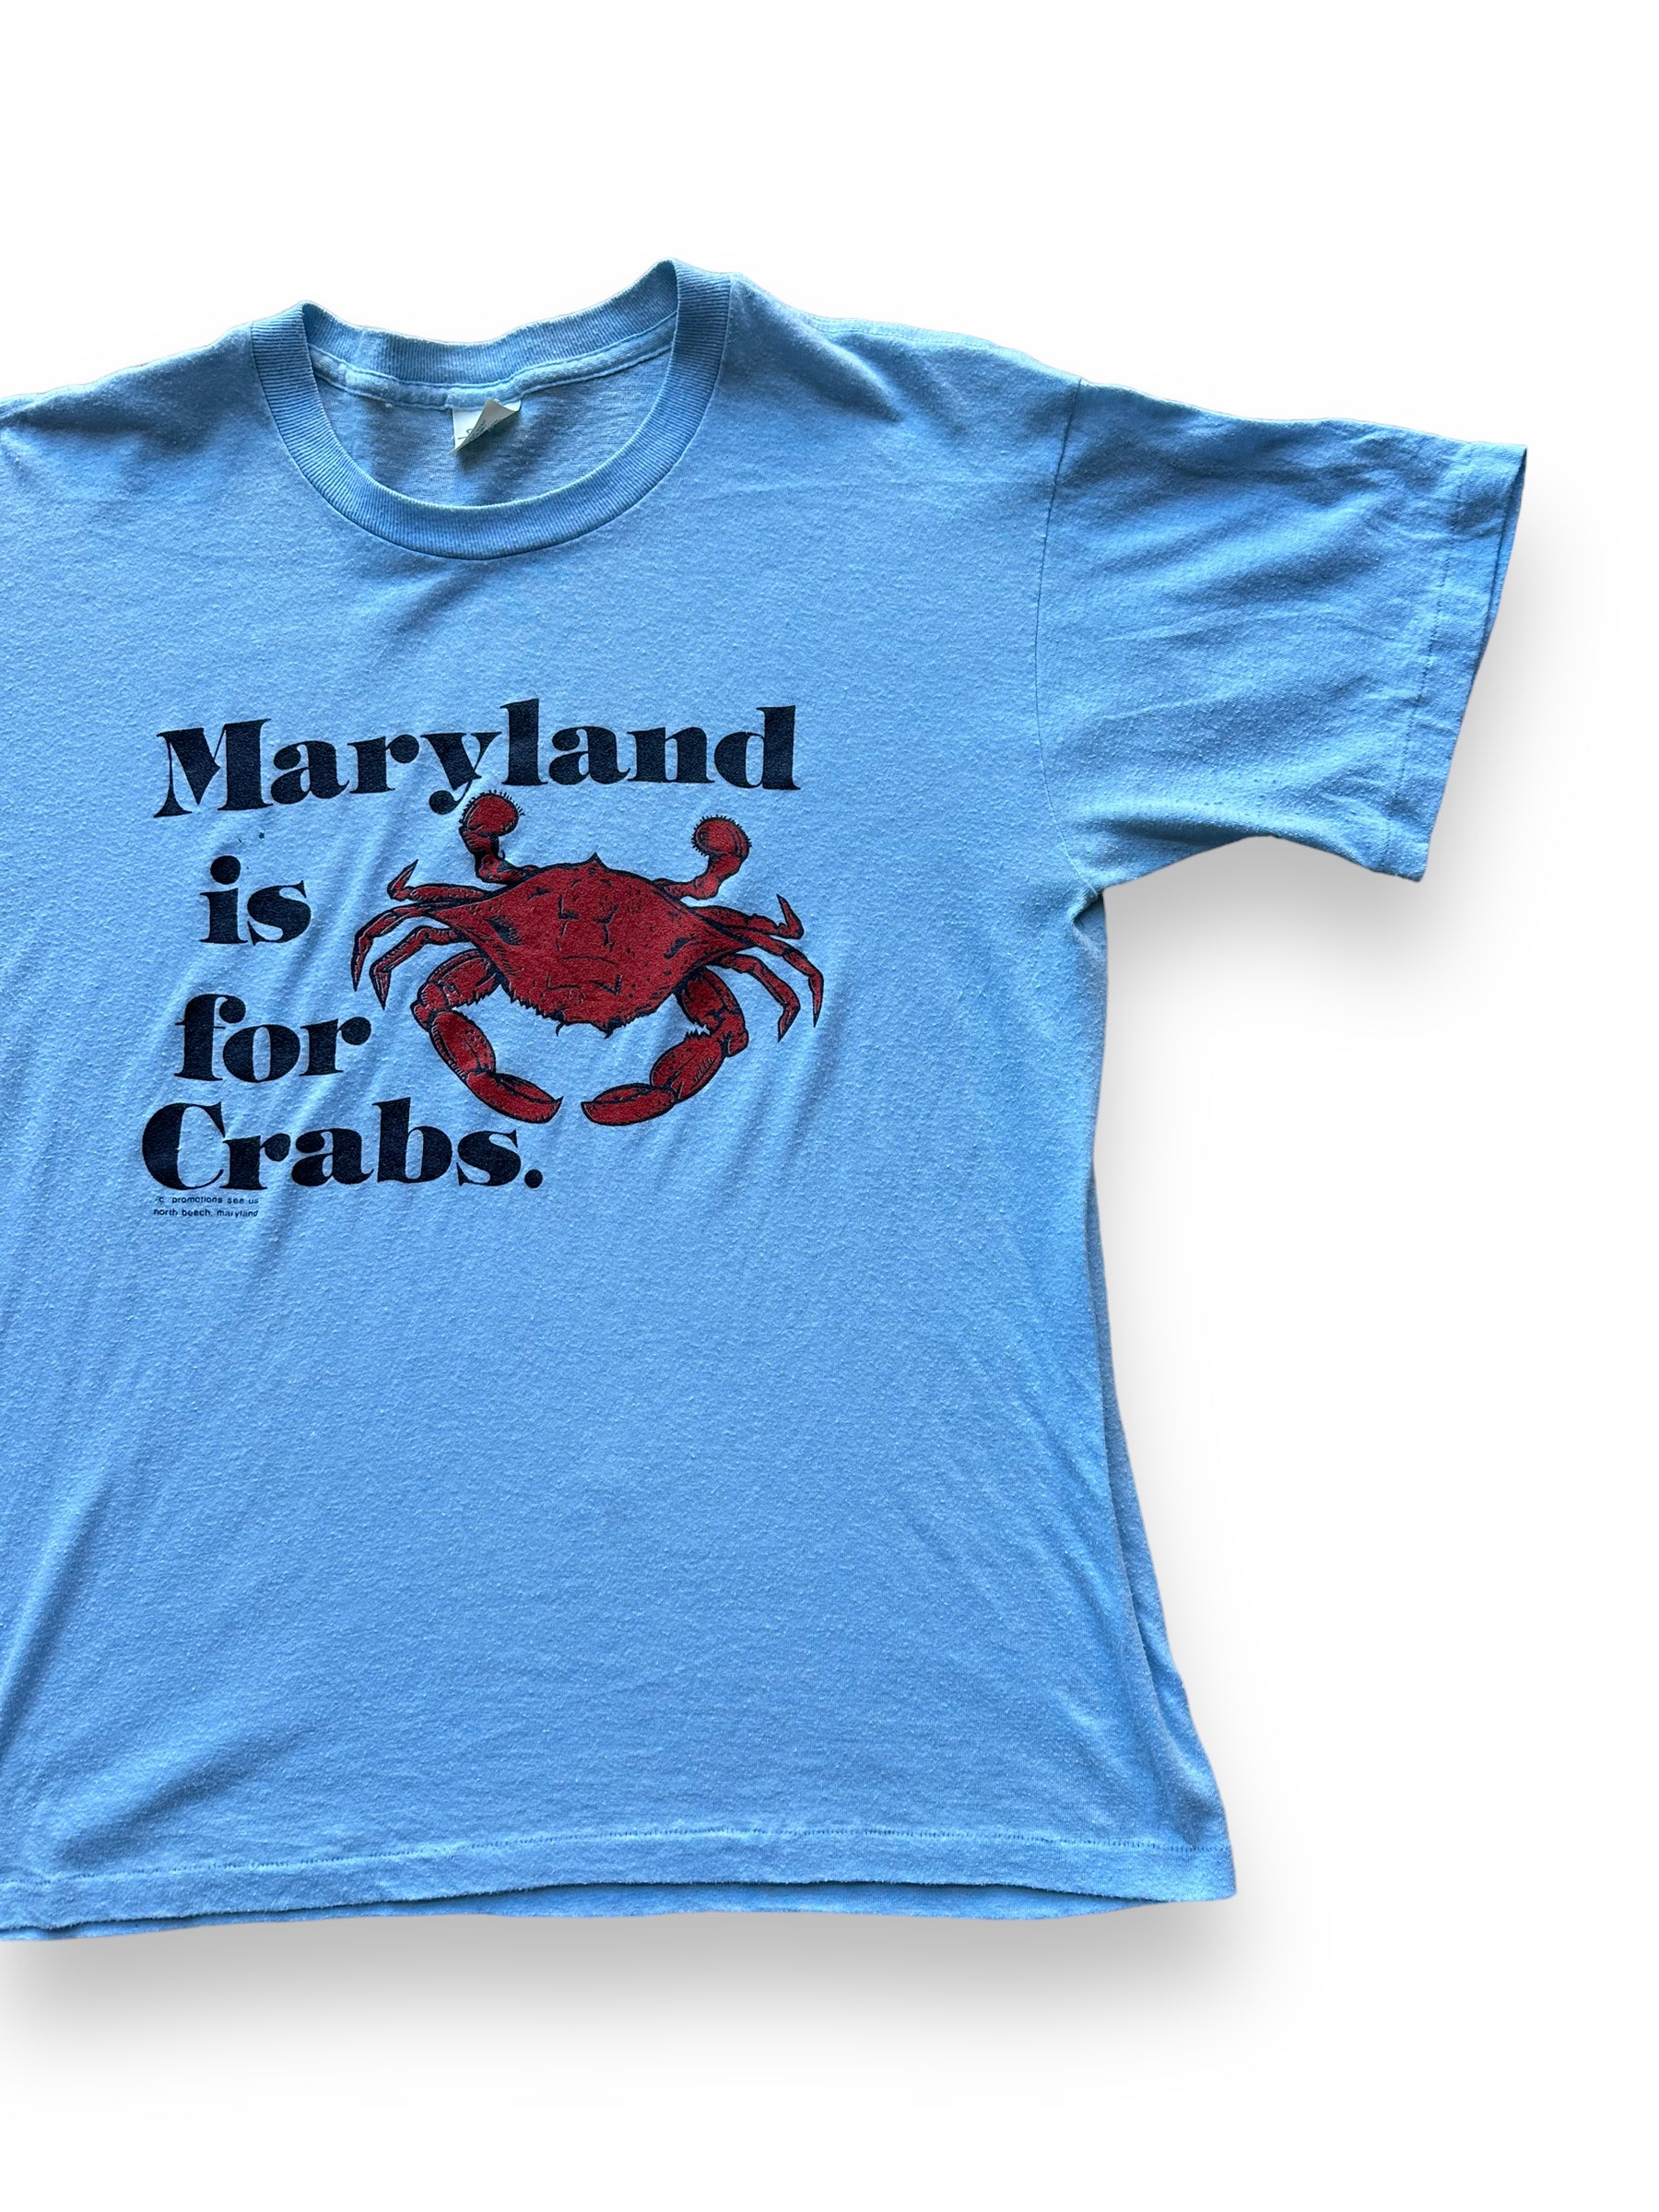 Front left of Vintage "Maryland is for Crabs" Tee SZ L |  Vintage Fishing Tee Seattle | Barn Owl Vintage